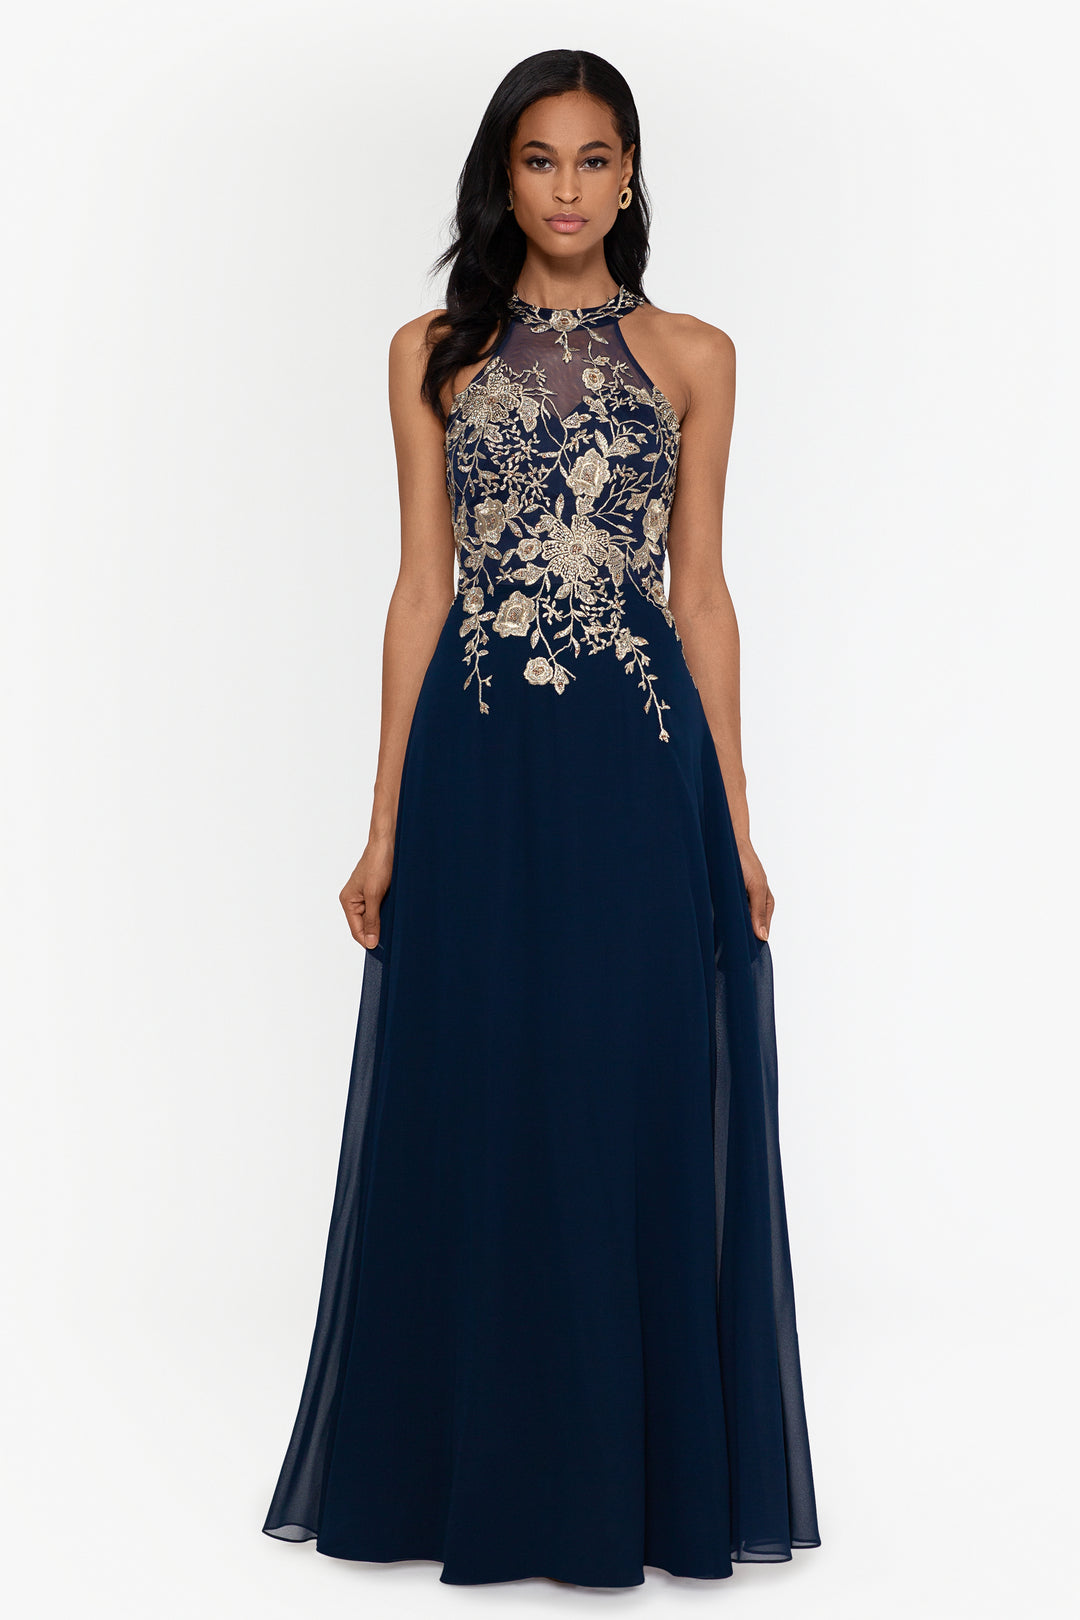 "Celeste" Long Embroidered Chiffon Gown - Betsy & Adam